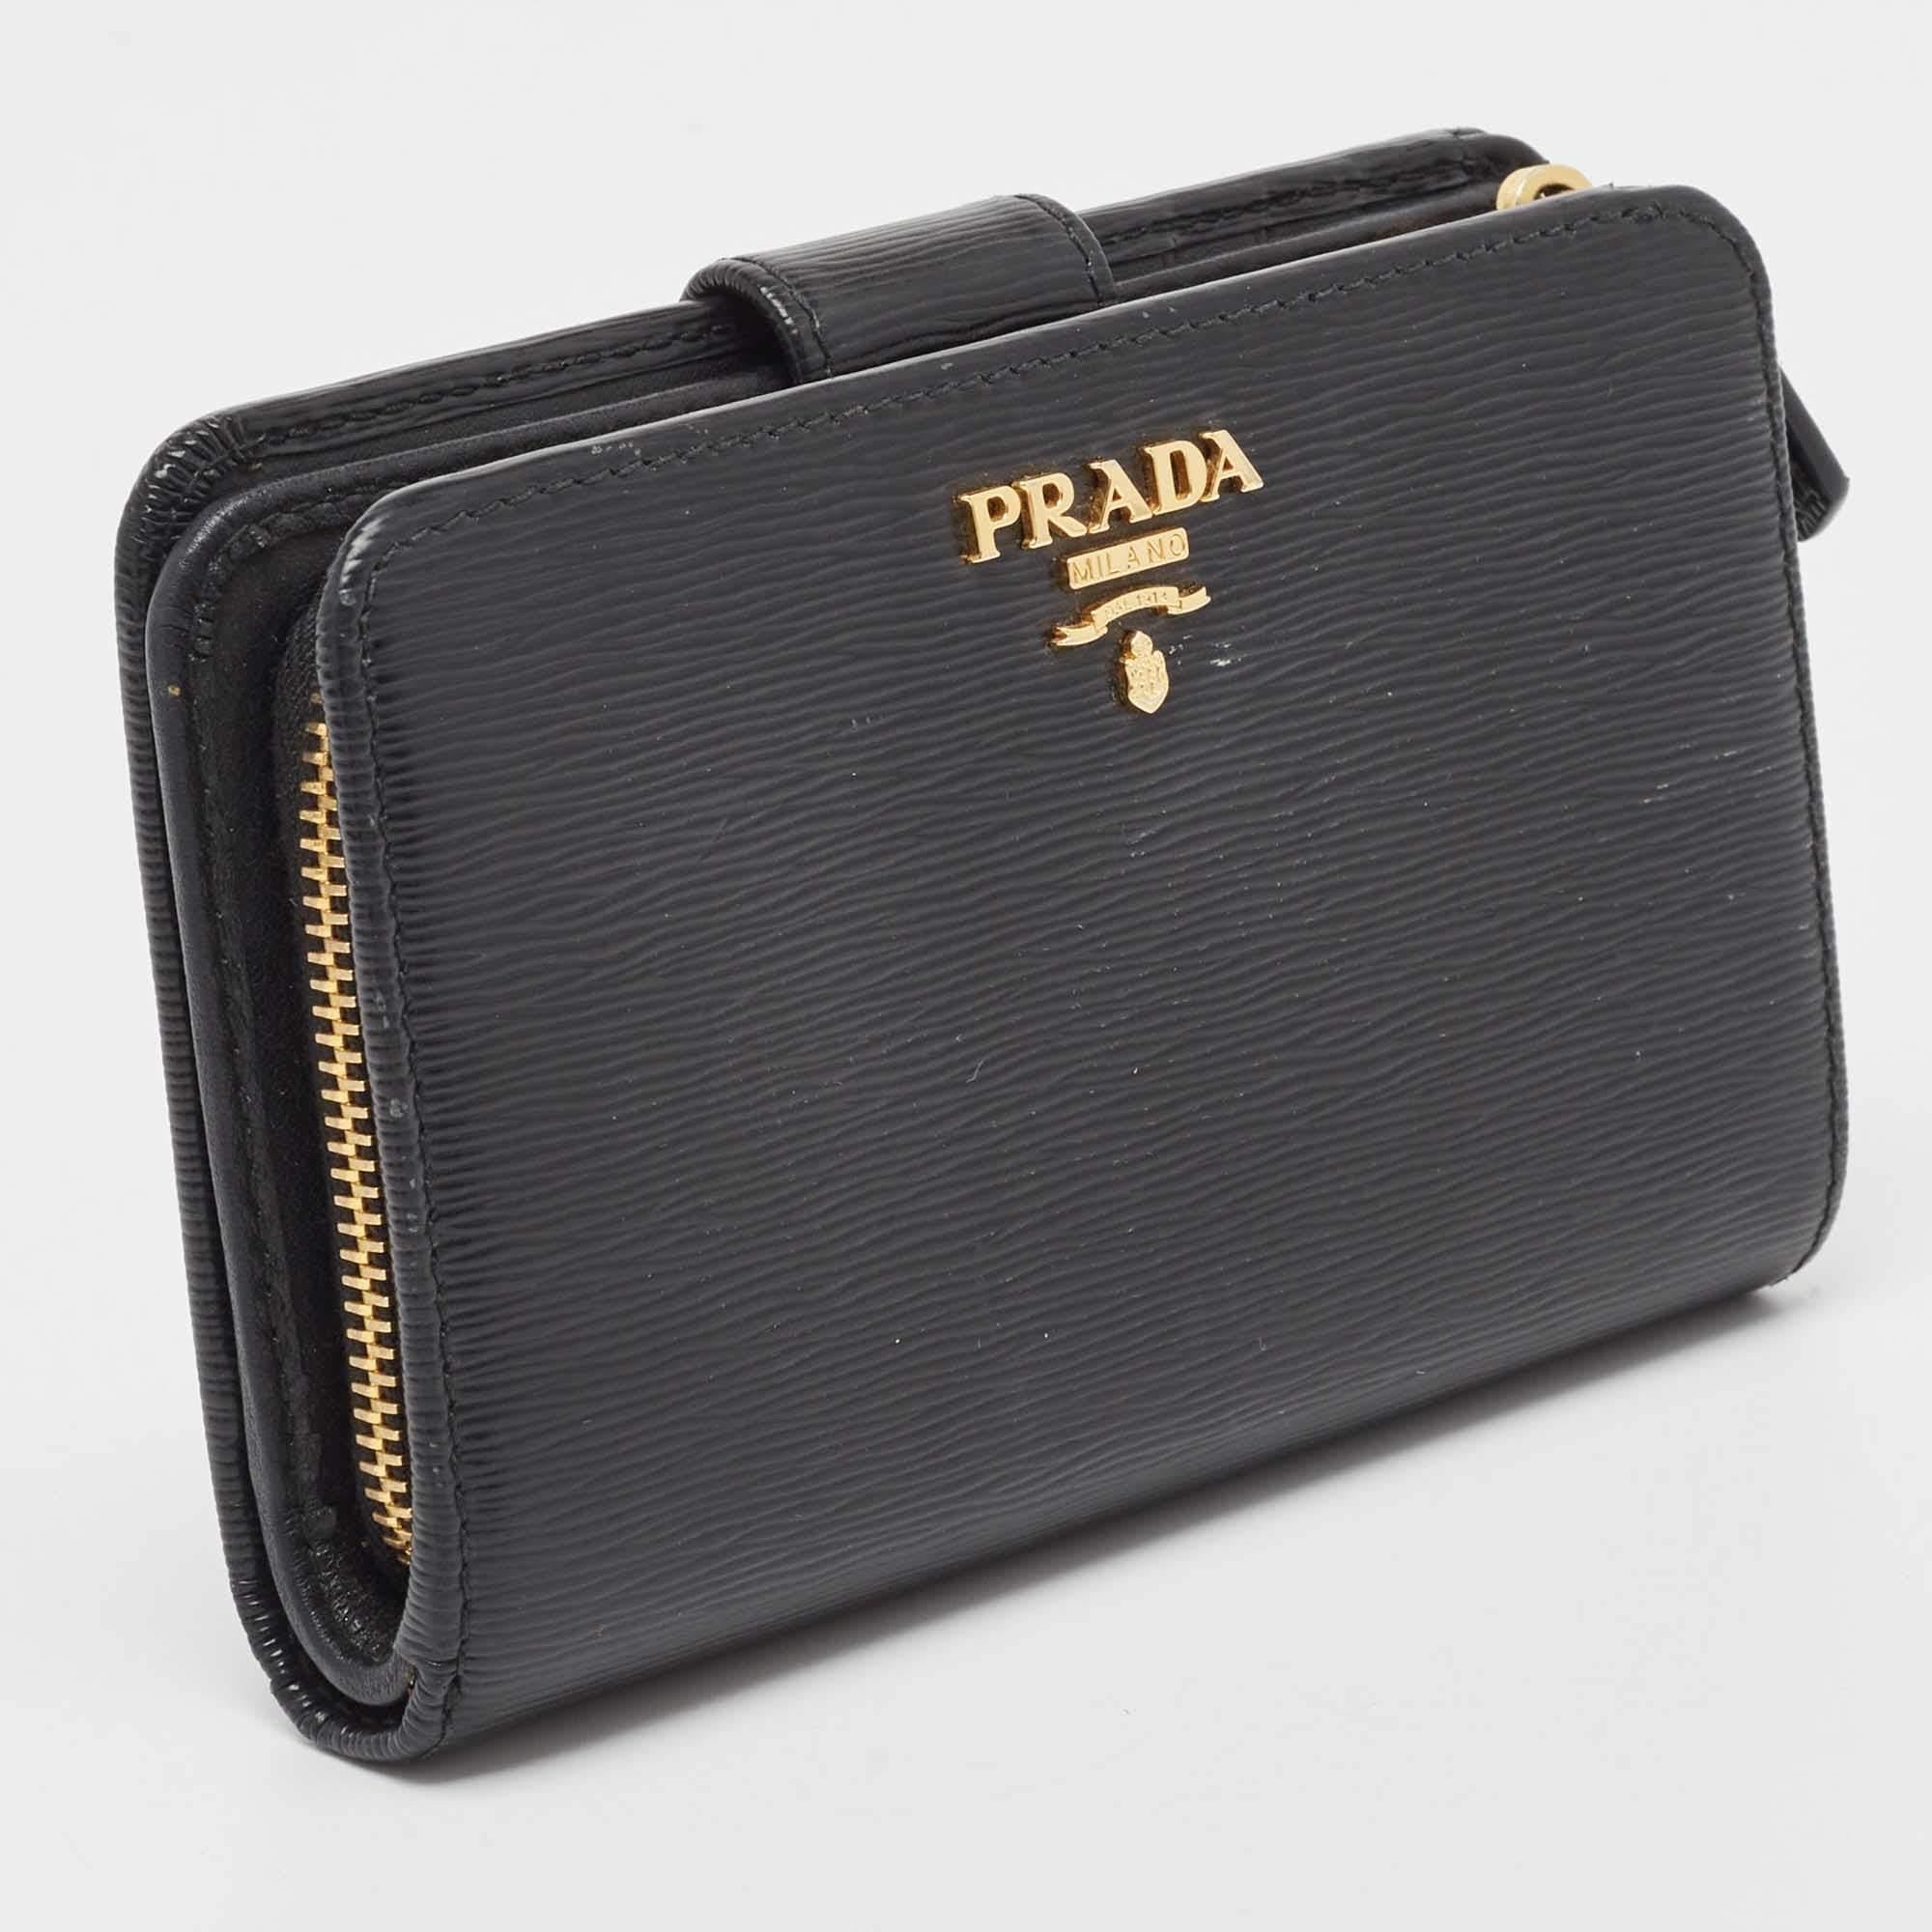 Compact and stylish, this wallet will be your favorite grab-and-go companion. Designed from quality materials, its interior is divided into different compartments to store your cards and cash perfectly.

